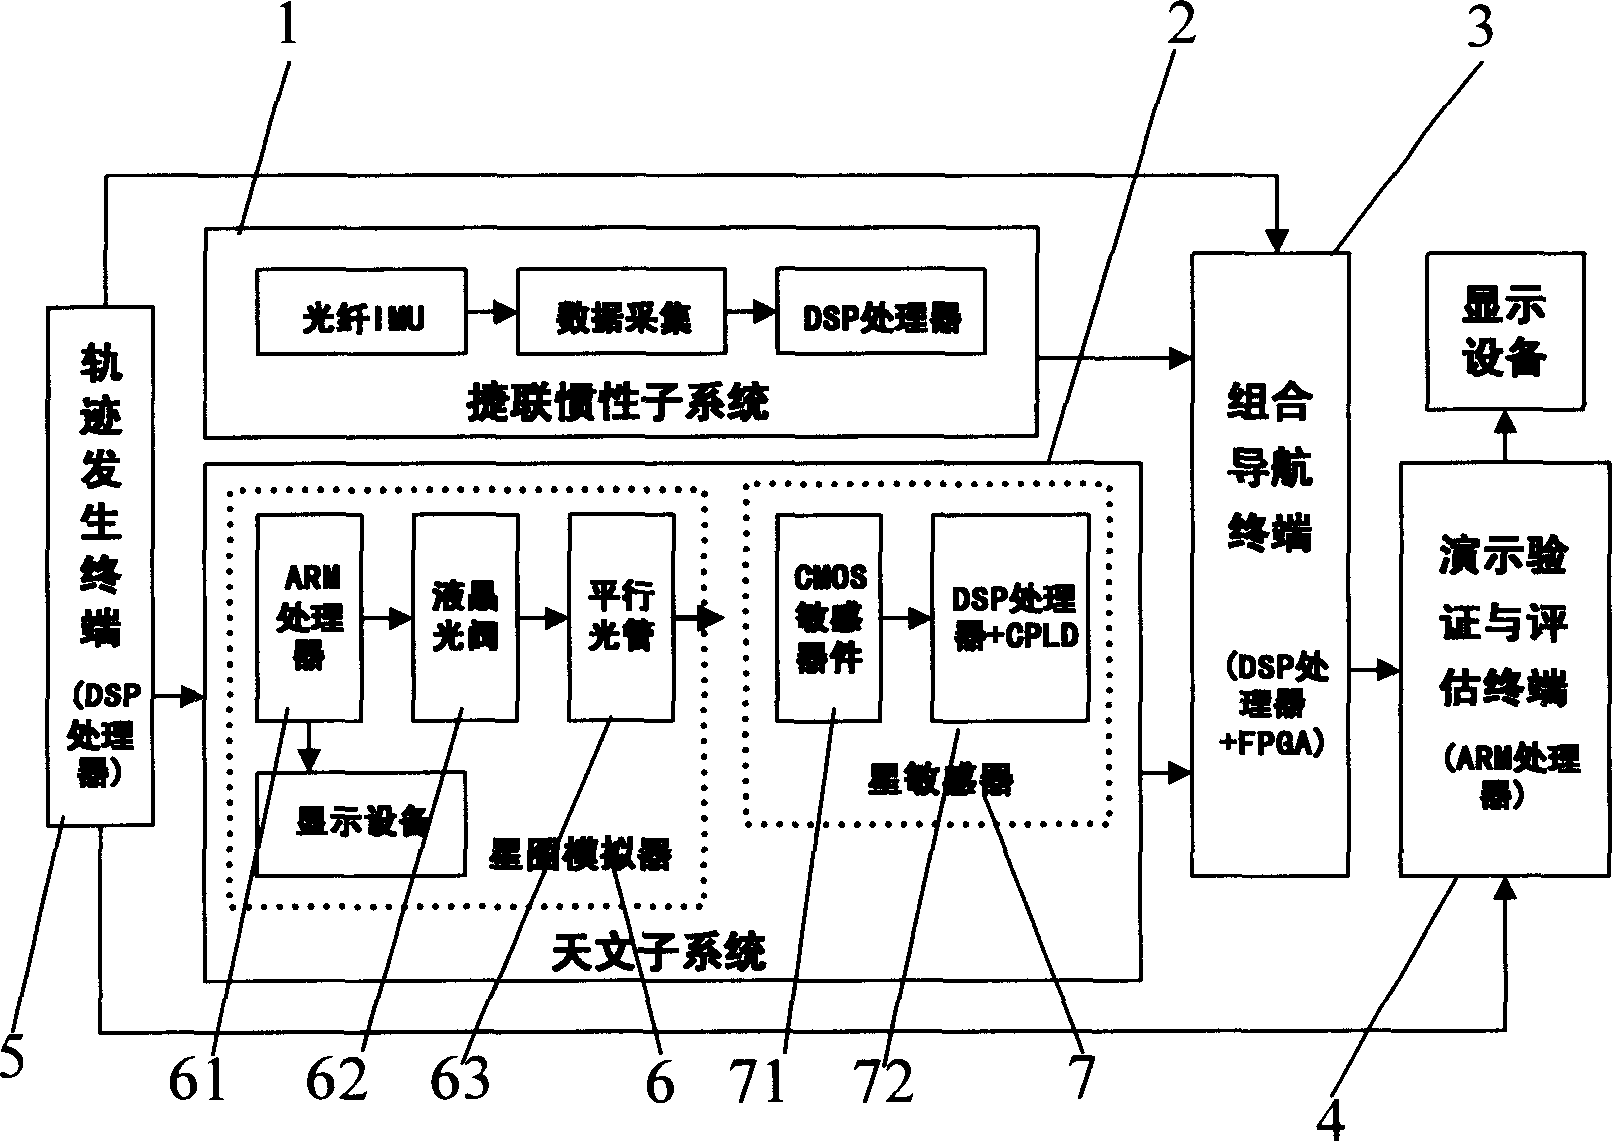 Strapdown intertial/celestial combined navigation semi-material emulation system